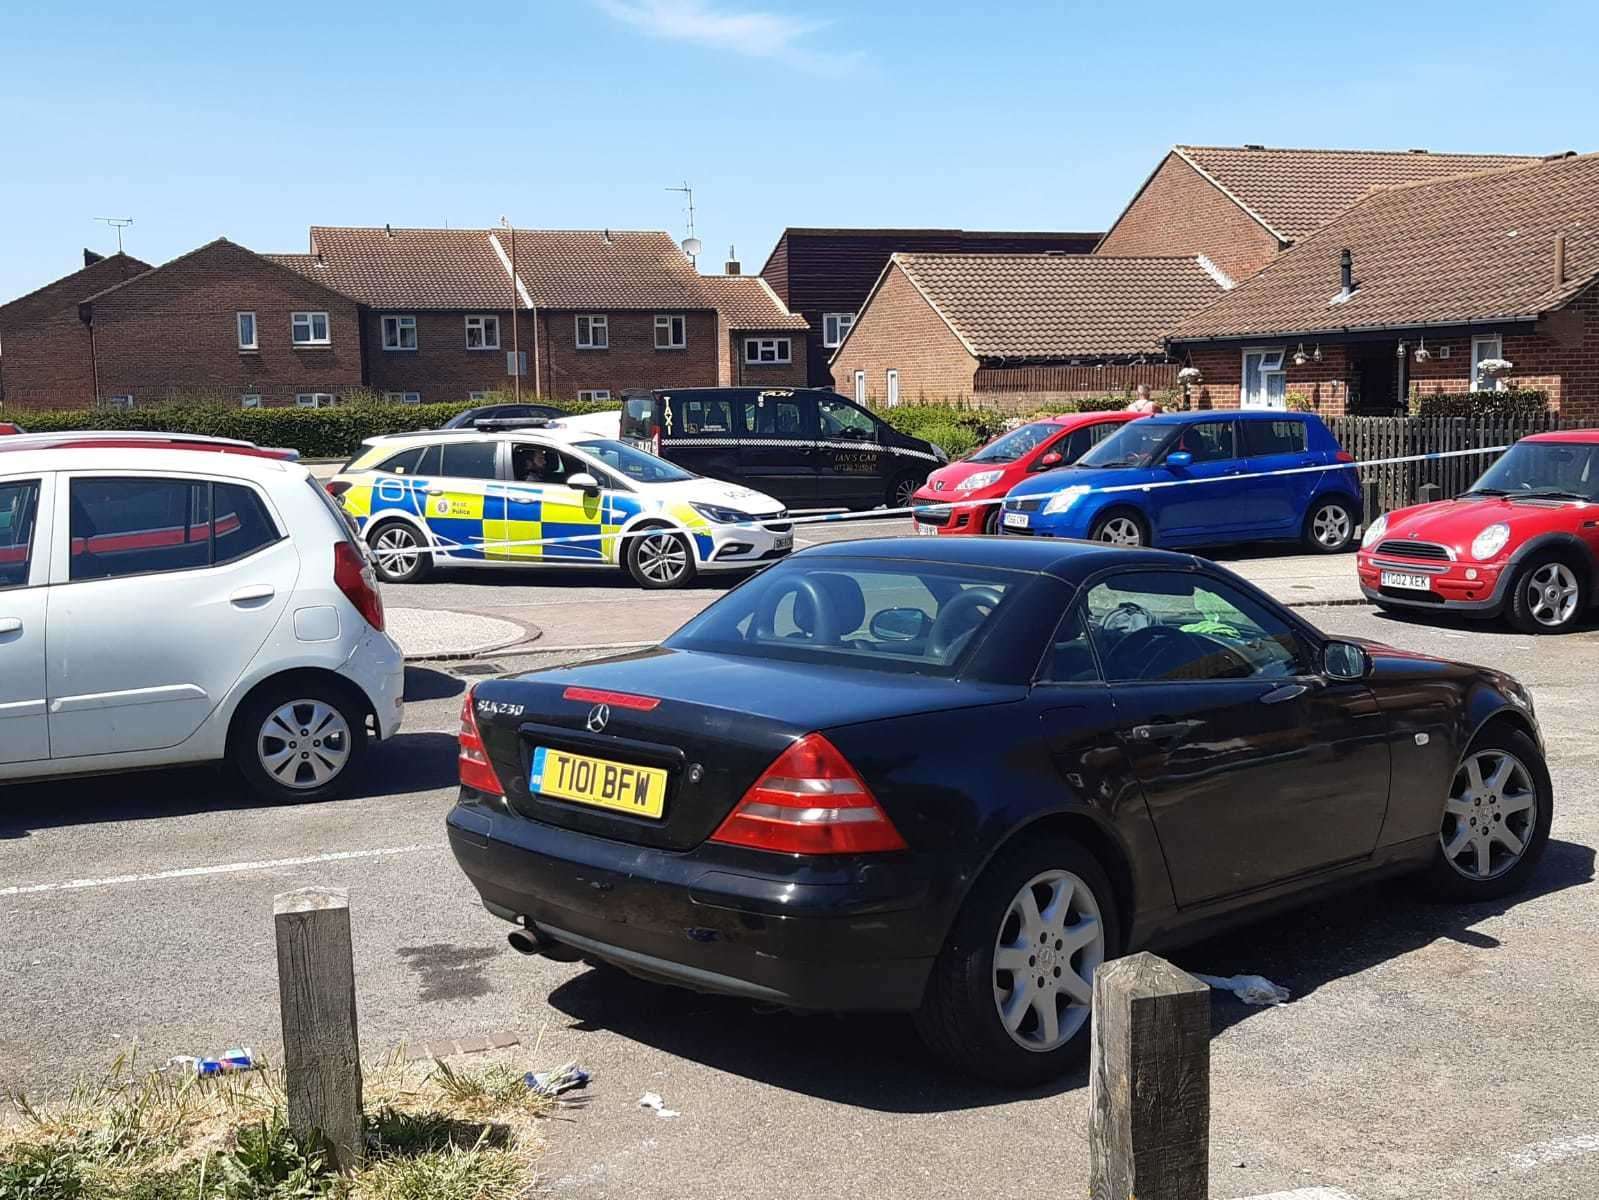 Armed police were called to the scene this morning, according to residents